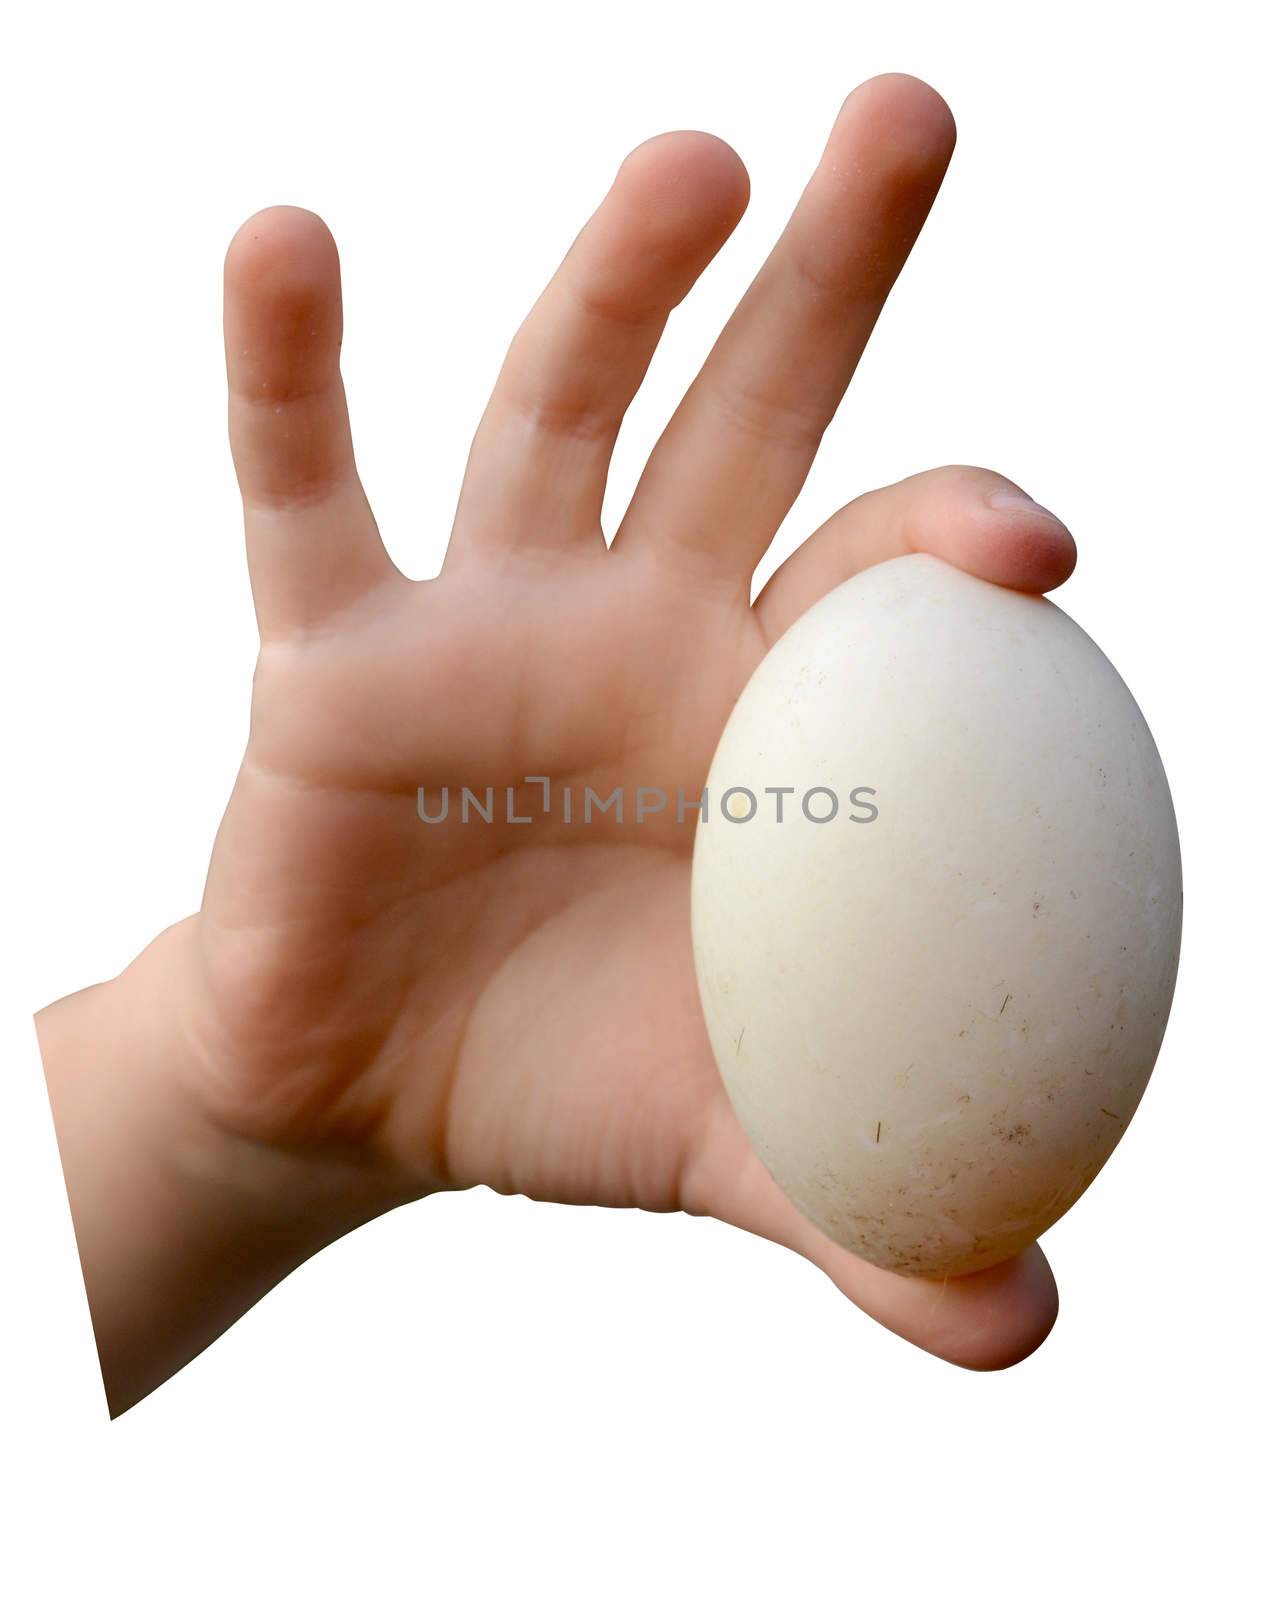 Isolation Of A Child's Hand Holding A Dirty Farm Egg